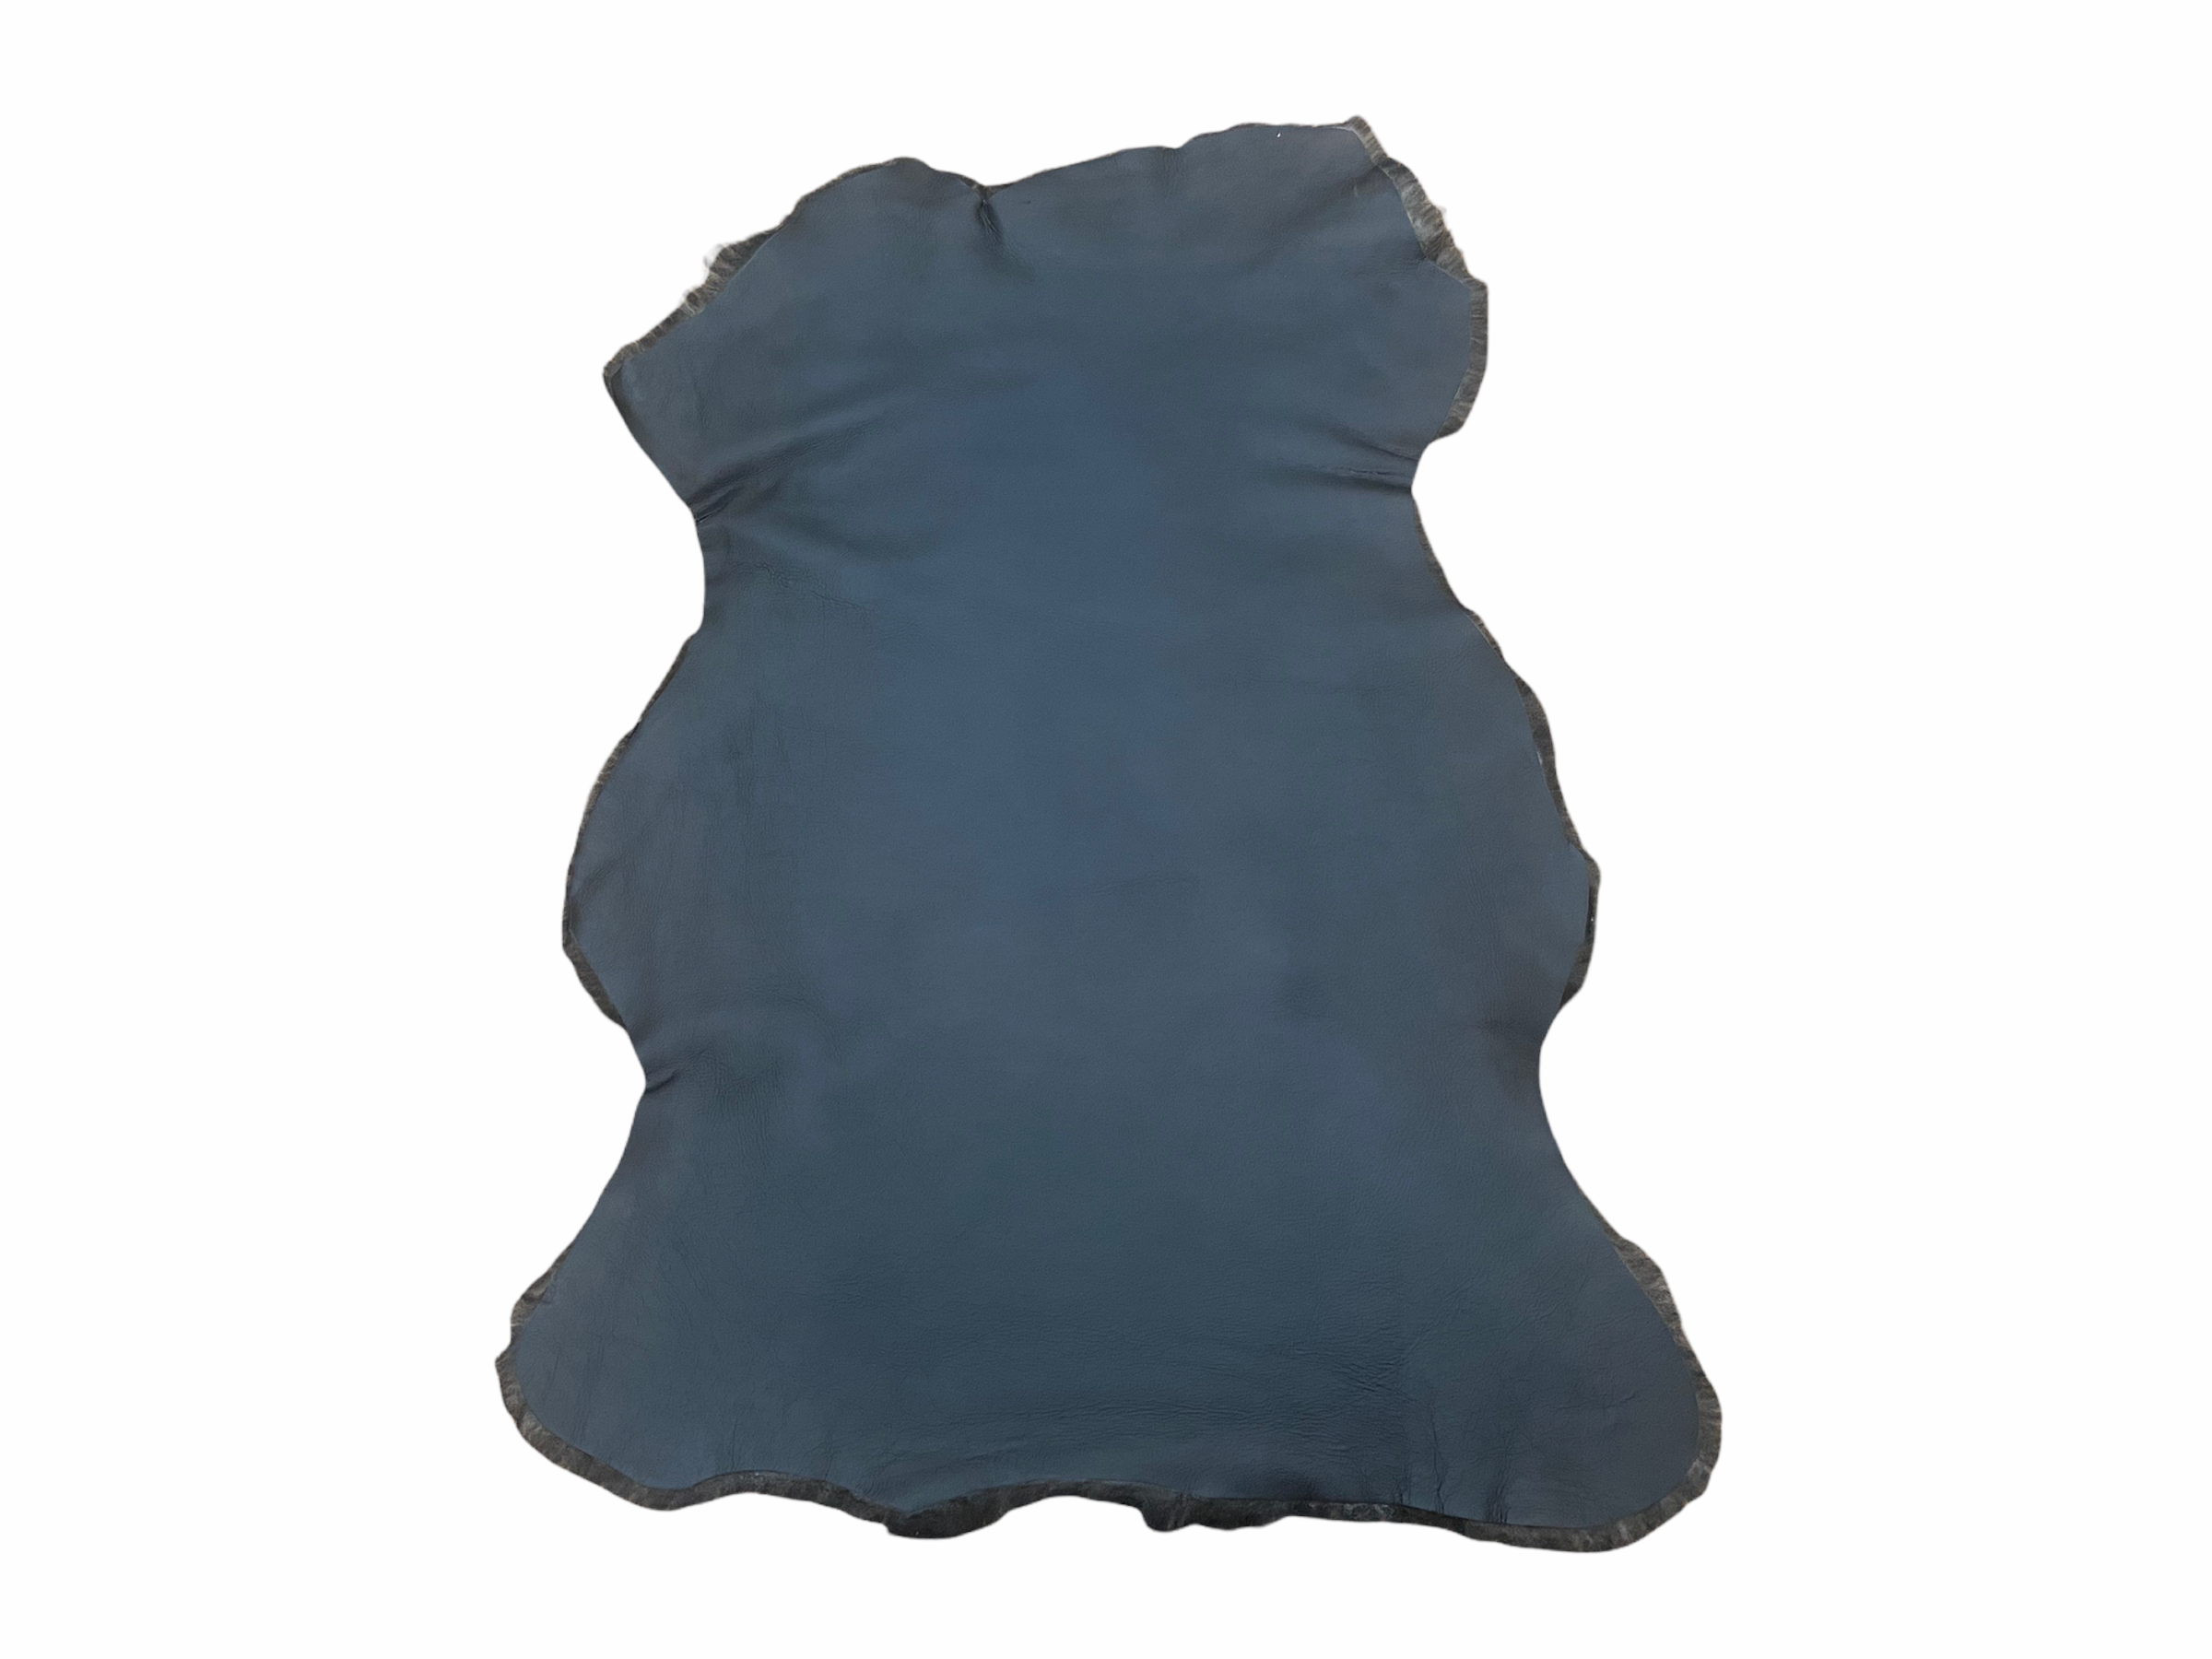 Aviator Seal Sheepskin, Crafted from Luxurious Sheepskin for Ultimate Comfort & Style. Inspired by the Elite Precision of Navy Seals this Product Offers Unparalleled Comfort without harming any Seals. : (15mm or 22mm) 10